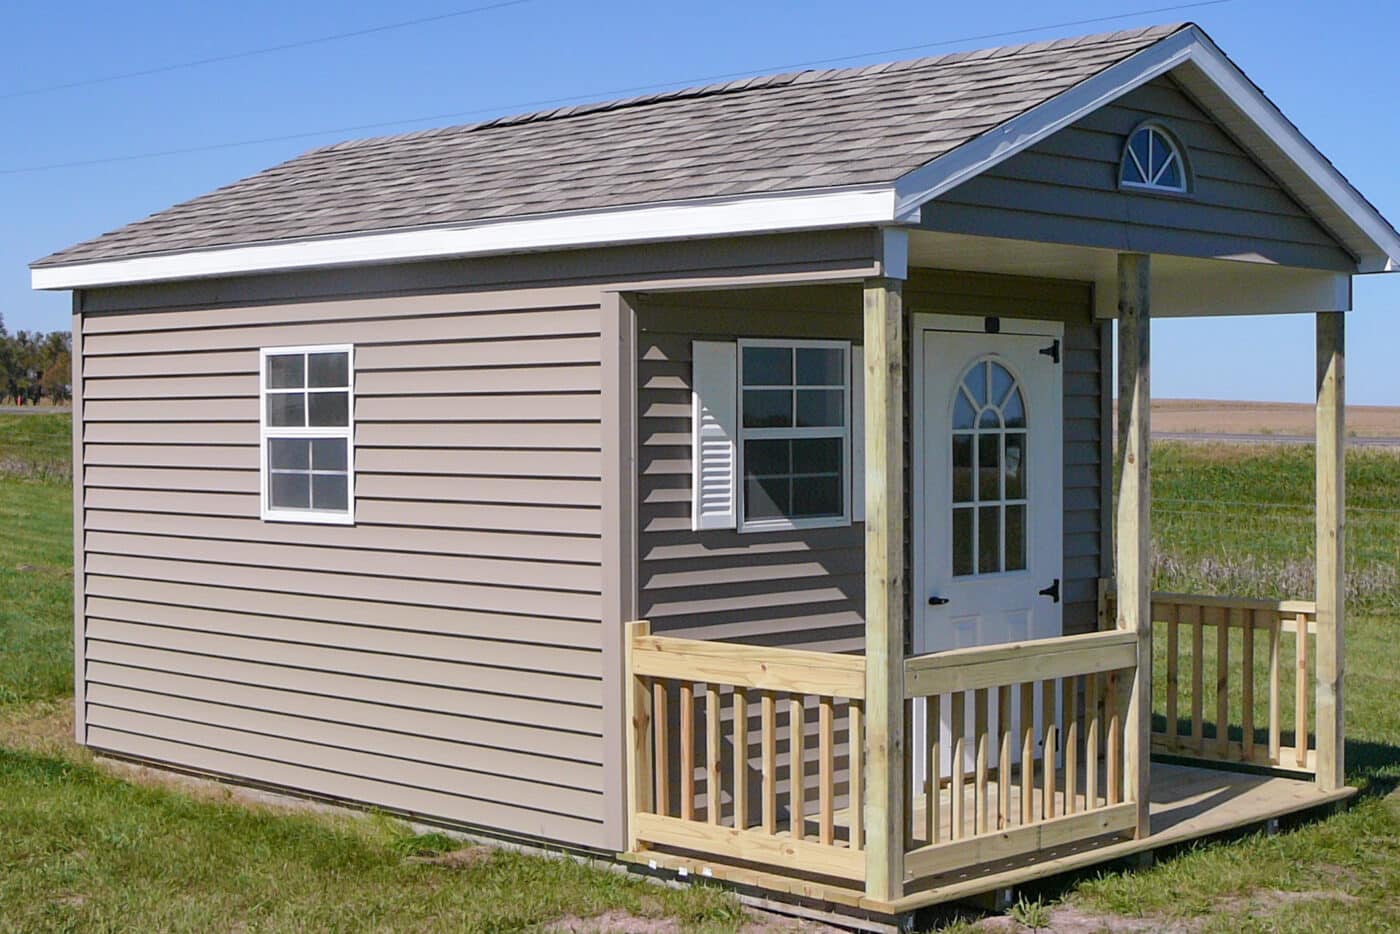 Gray playhouse with porch